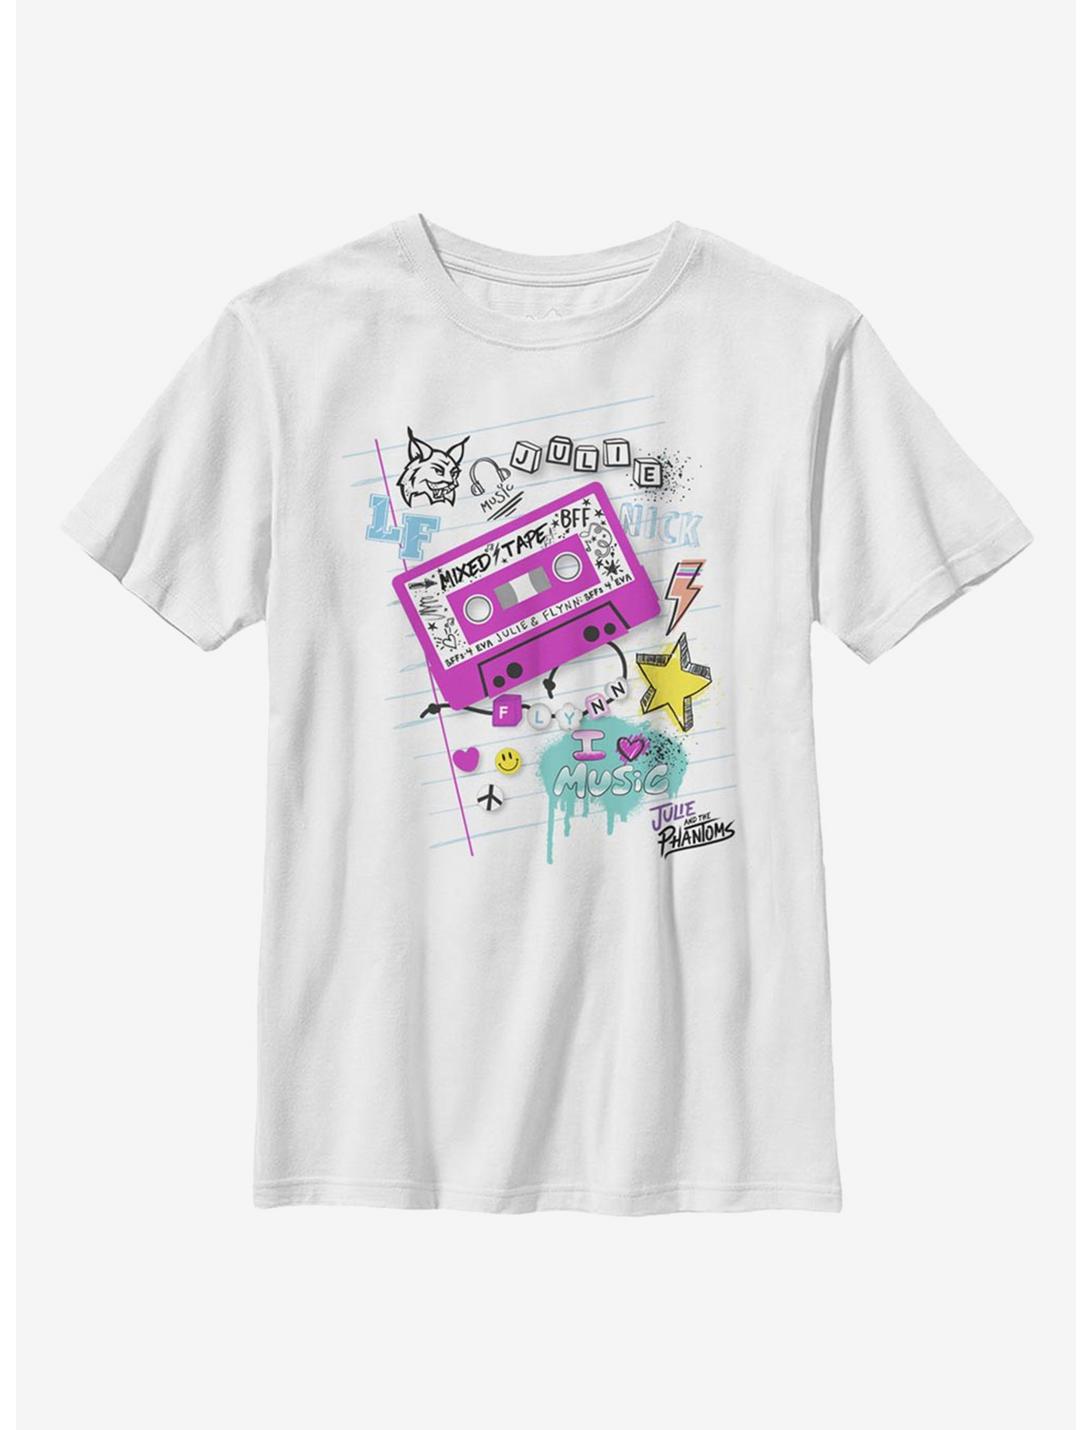 Julie And The Phantoms School Page Youth T-Shirt, WHITE, hi-res